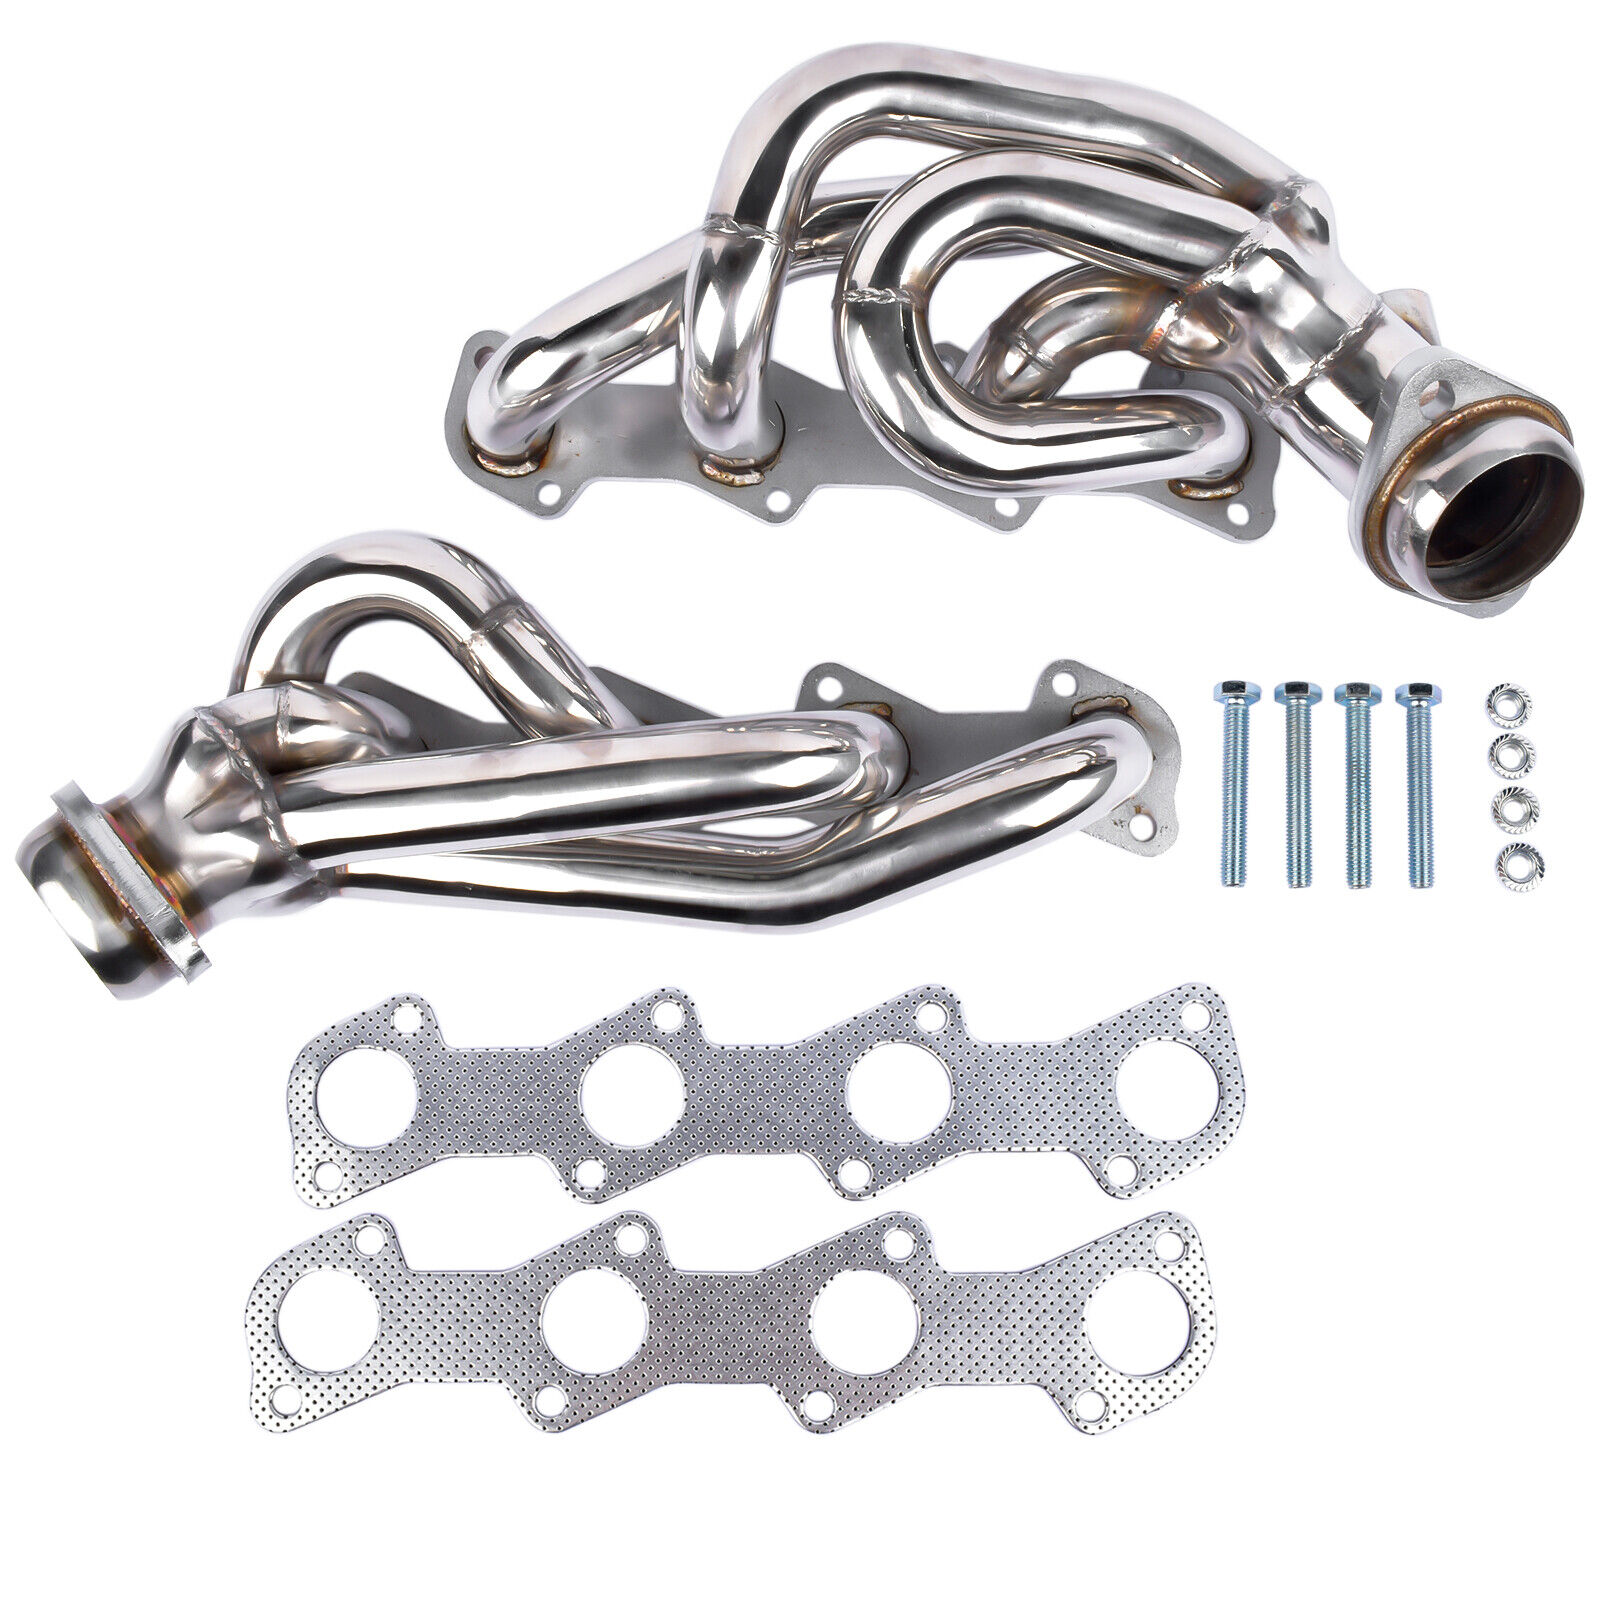 Shorty Headers Manifold for Ford F-150/250 Expedition 97-03 5.4L Stainless Steel